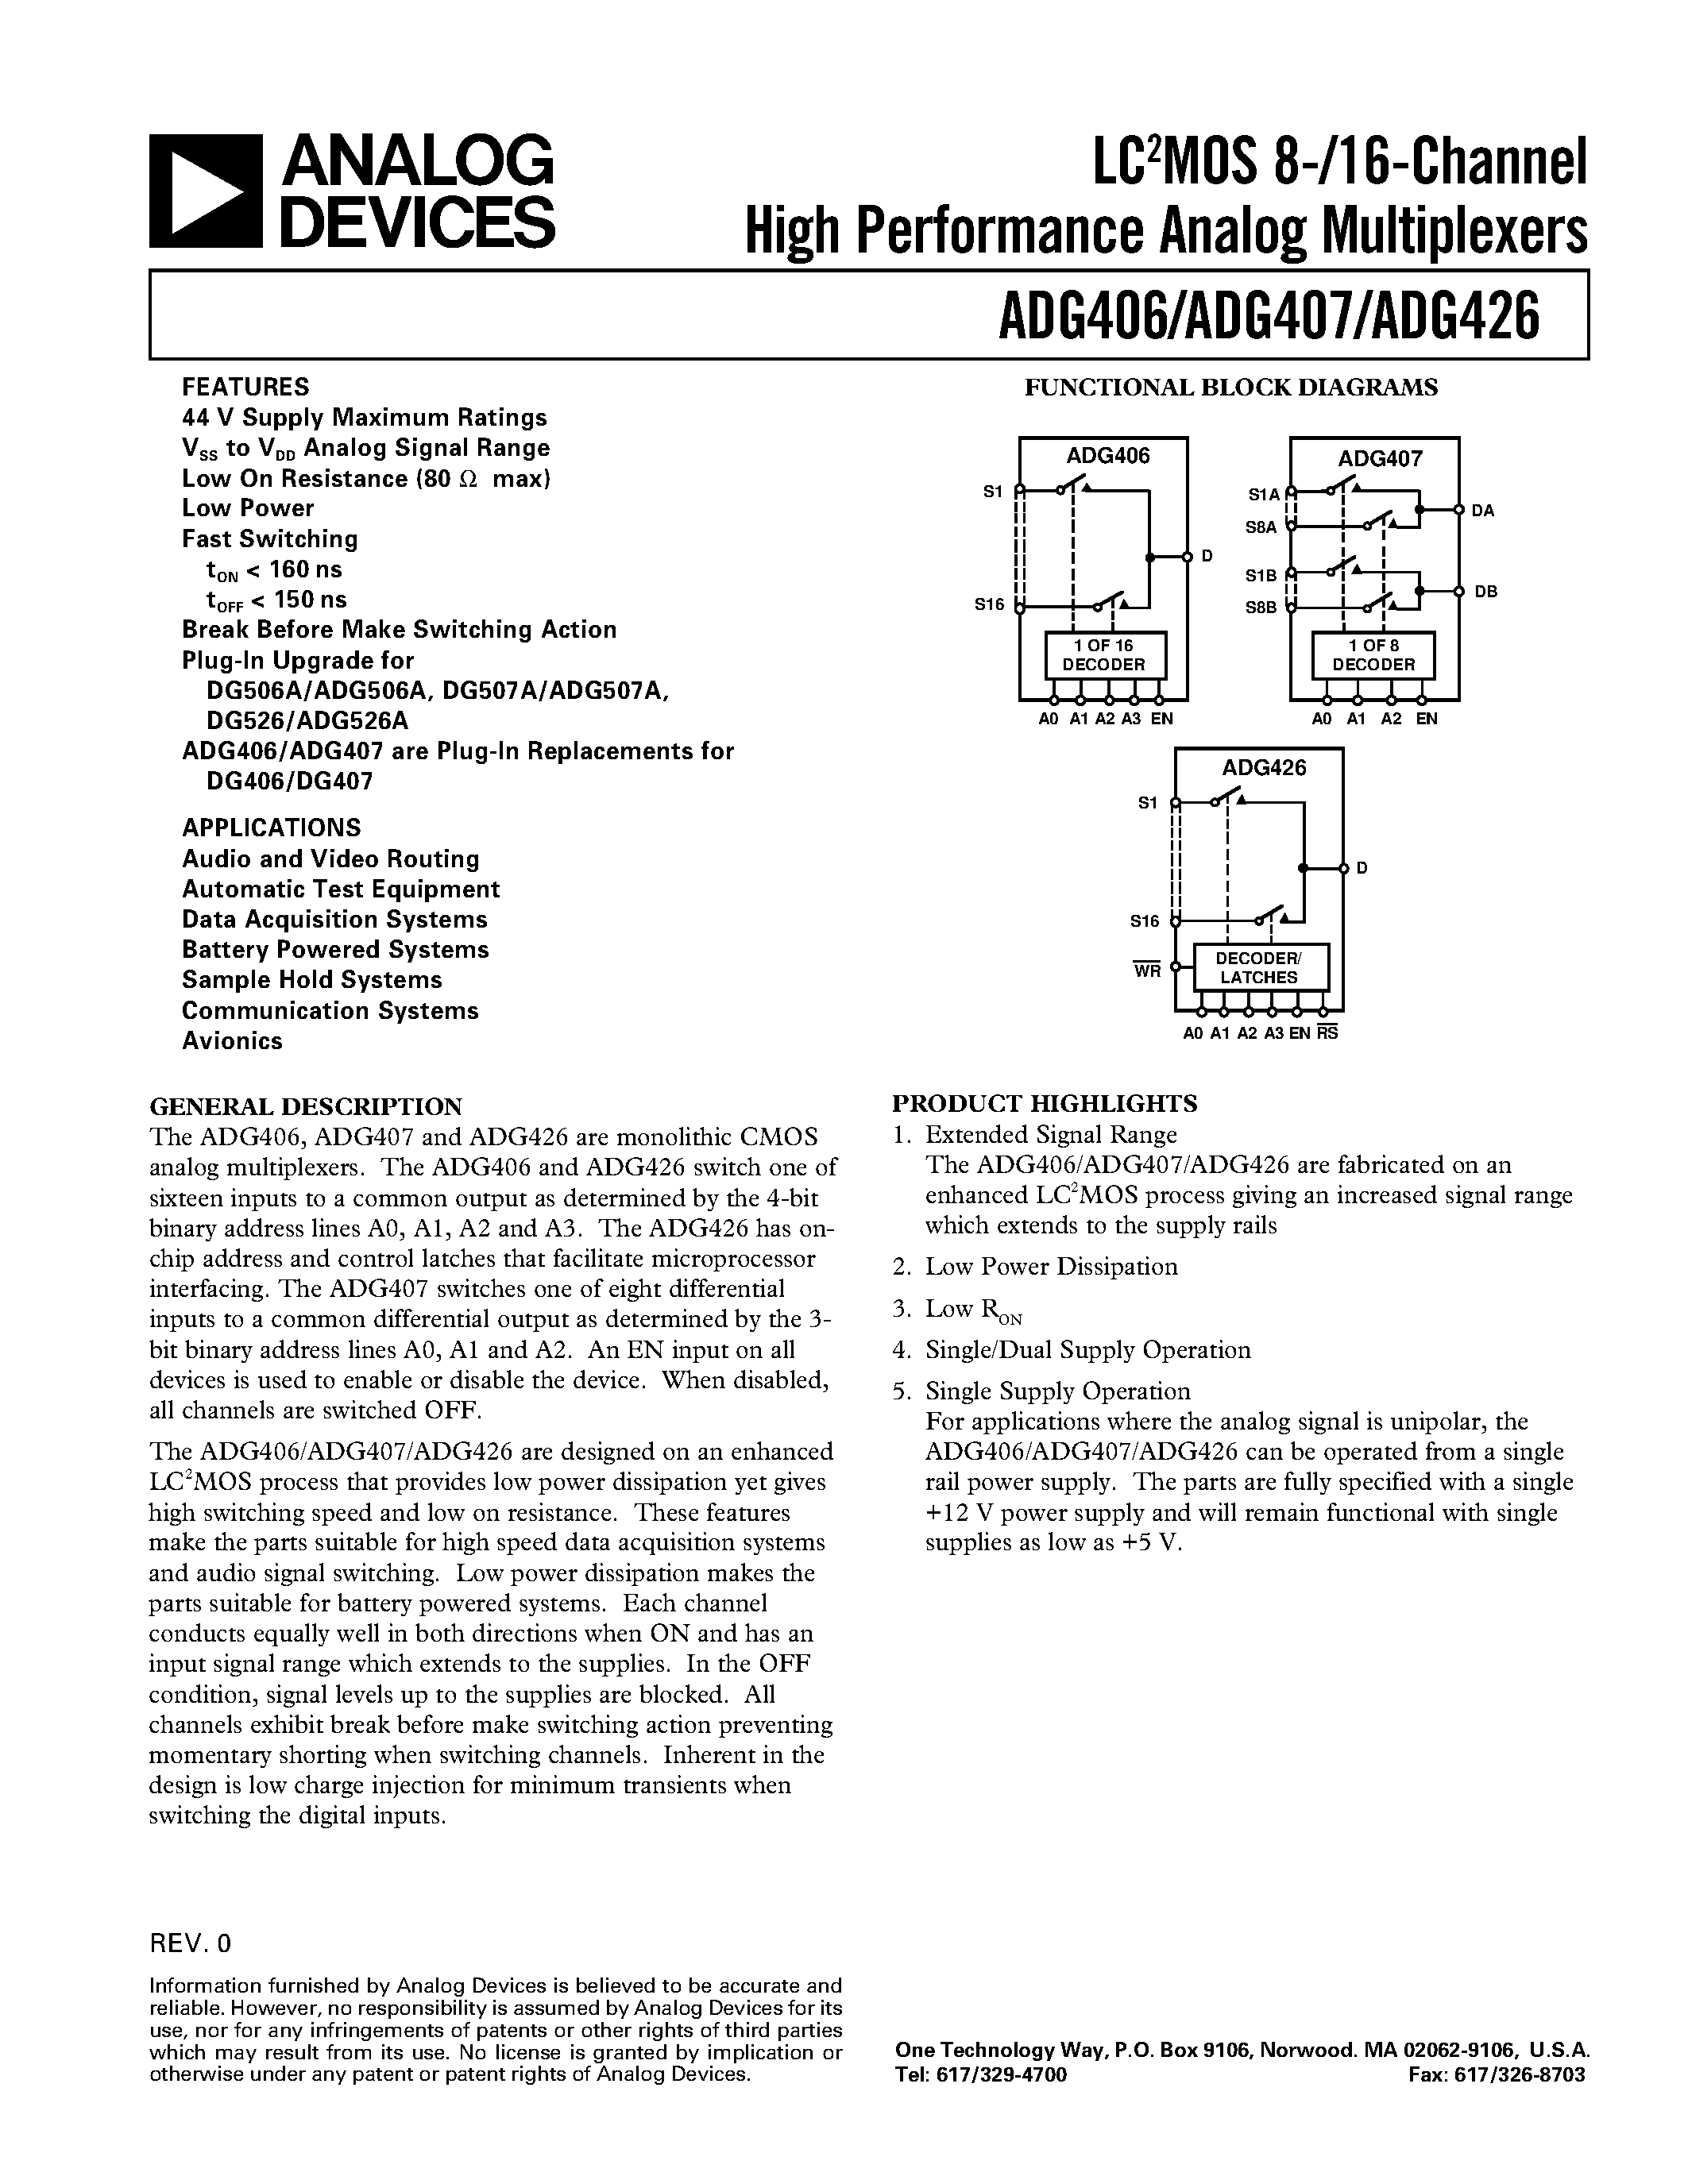 Datasheet ADG406BN - LC2MOS 8-/16-Channel High Performance Analog Multiplexers page 1